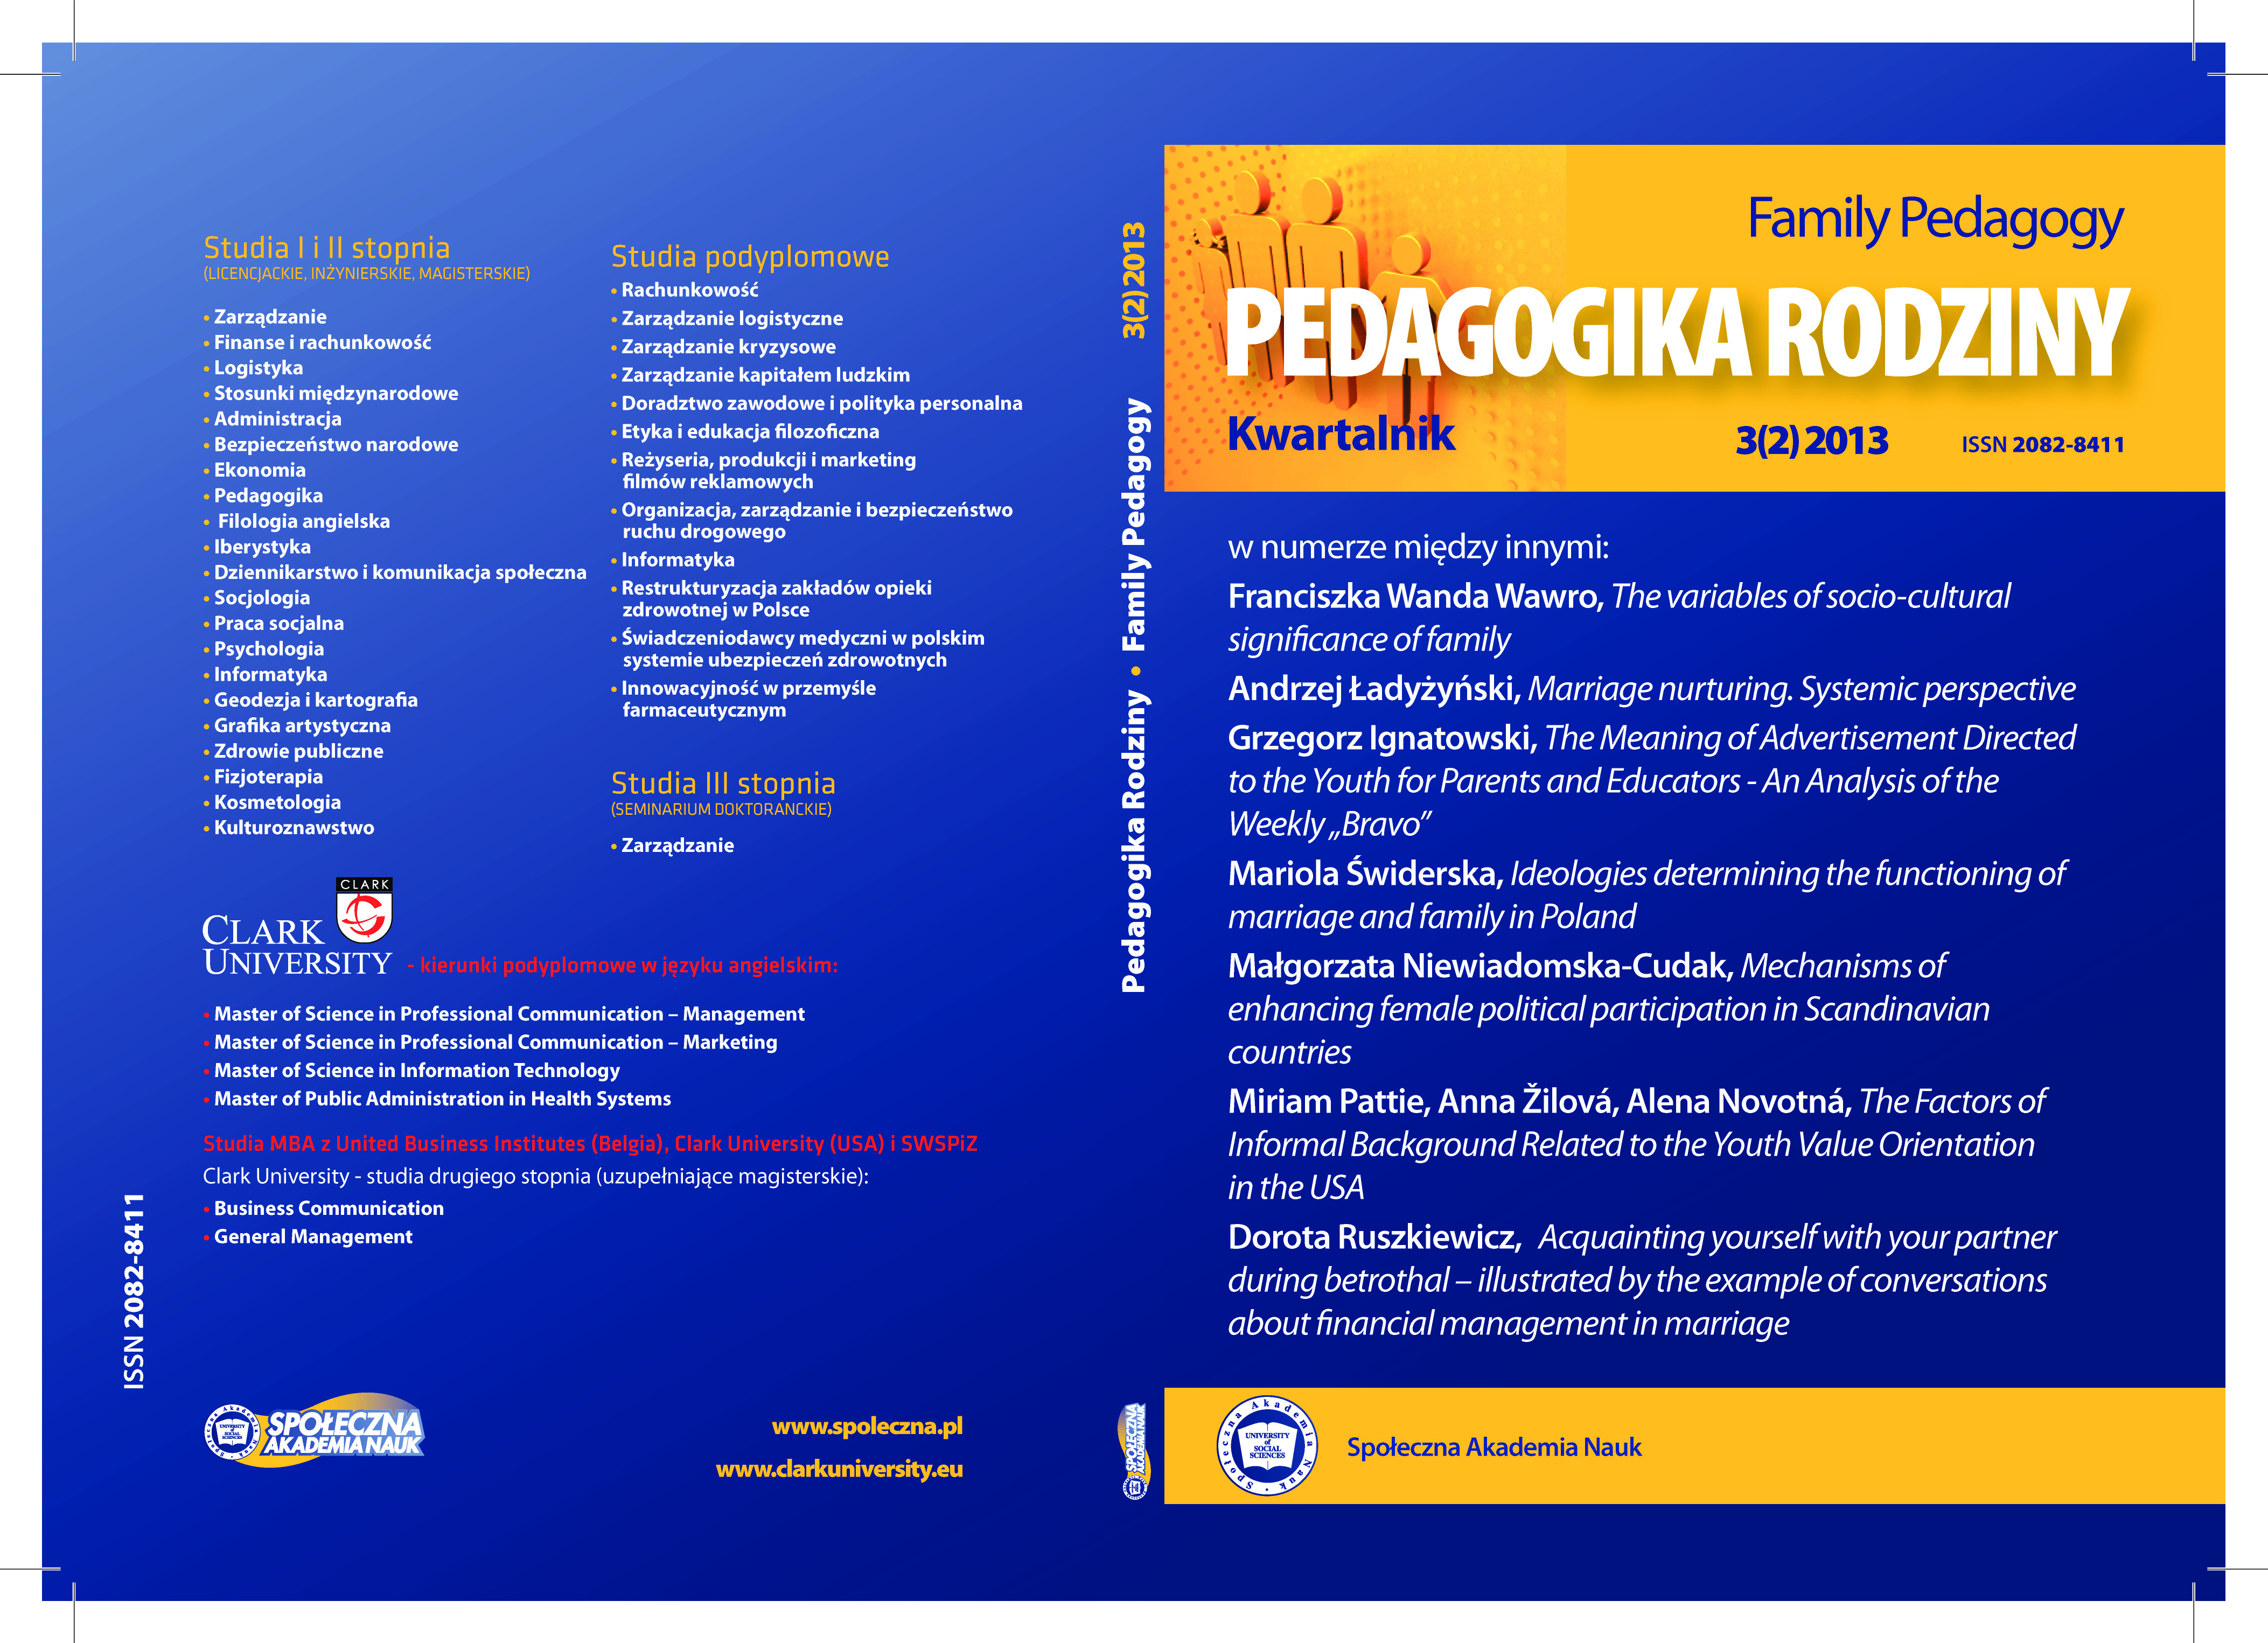 Ideologies determining the functioning of marriage 
 and family in Poland